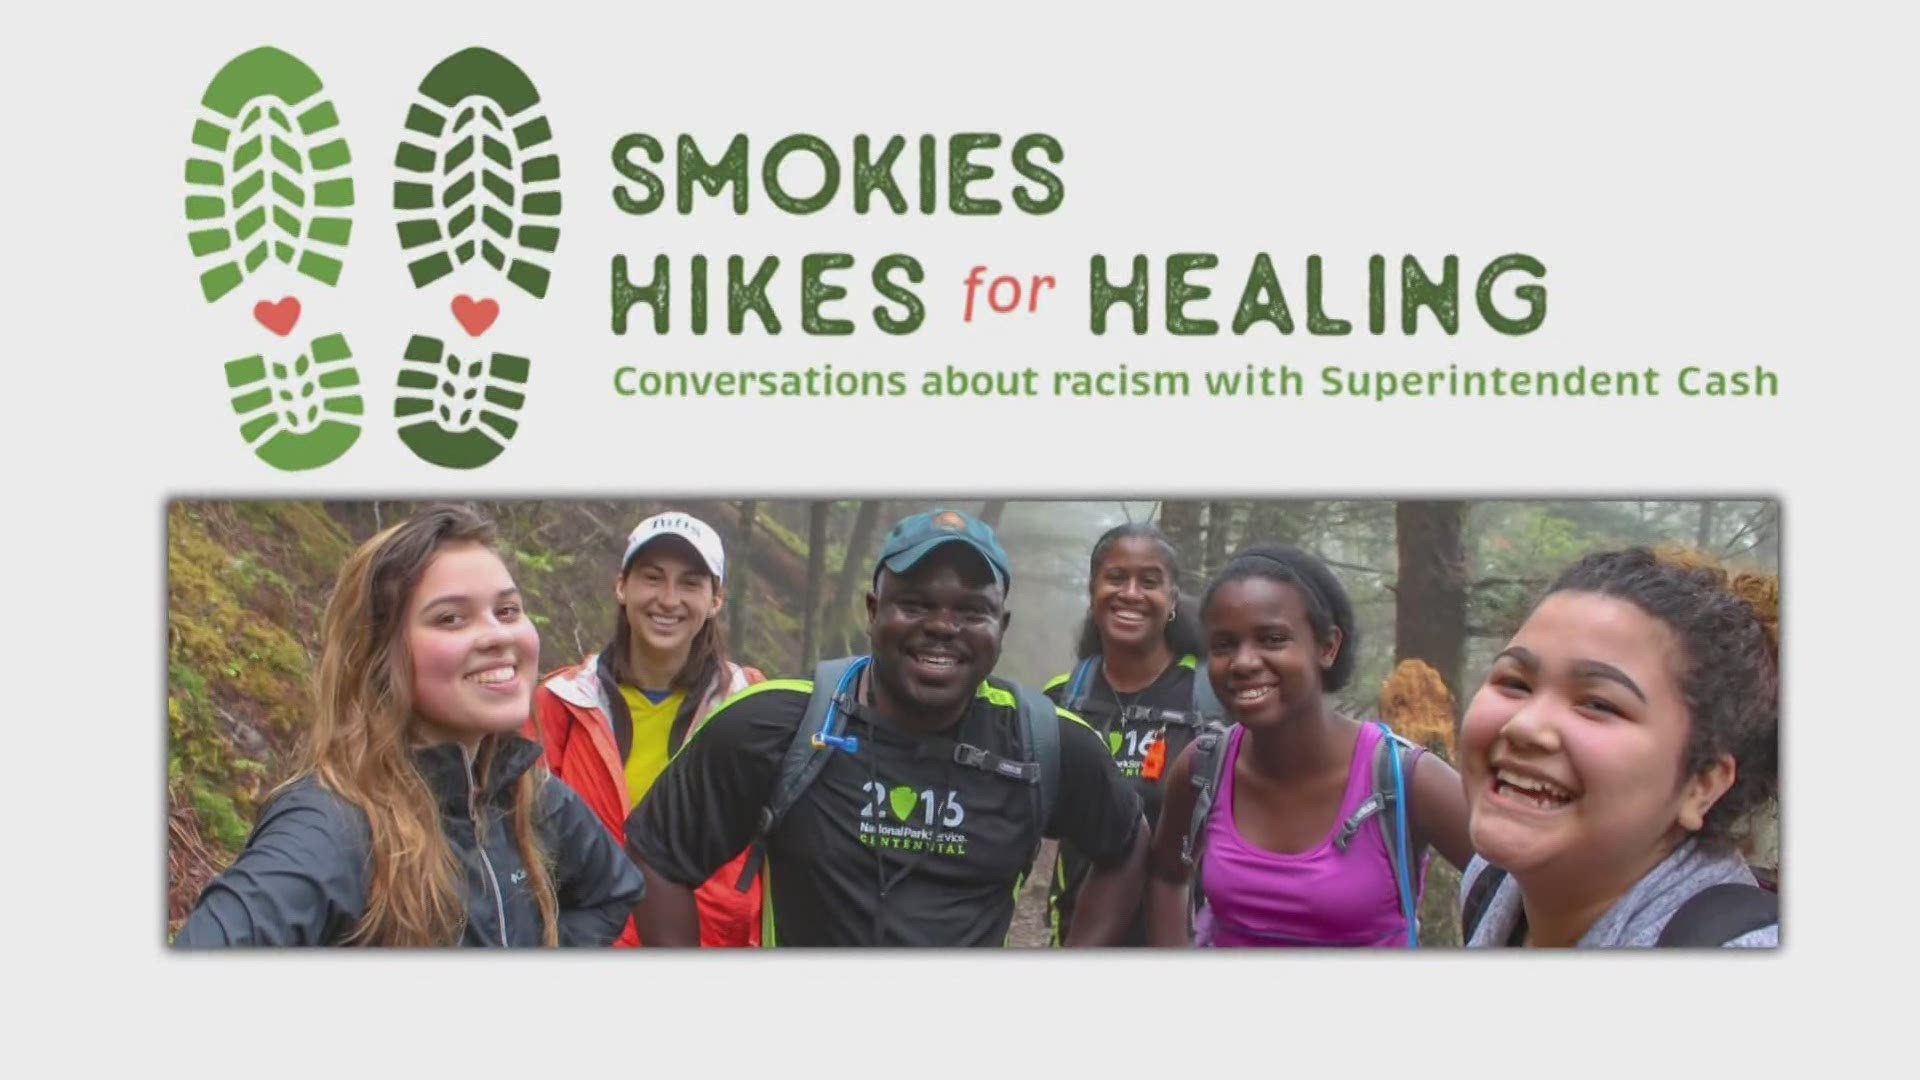 As the country continues to confront complex issues of racism and diversity, the superintendent of the Great Smoky Mountains says the national park can help.